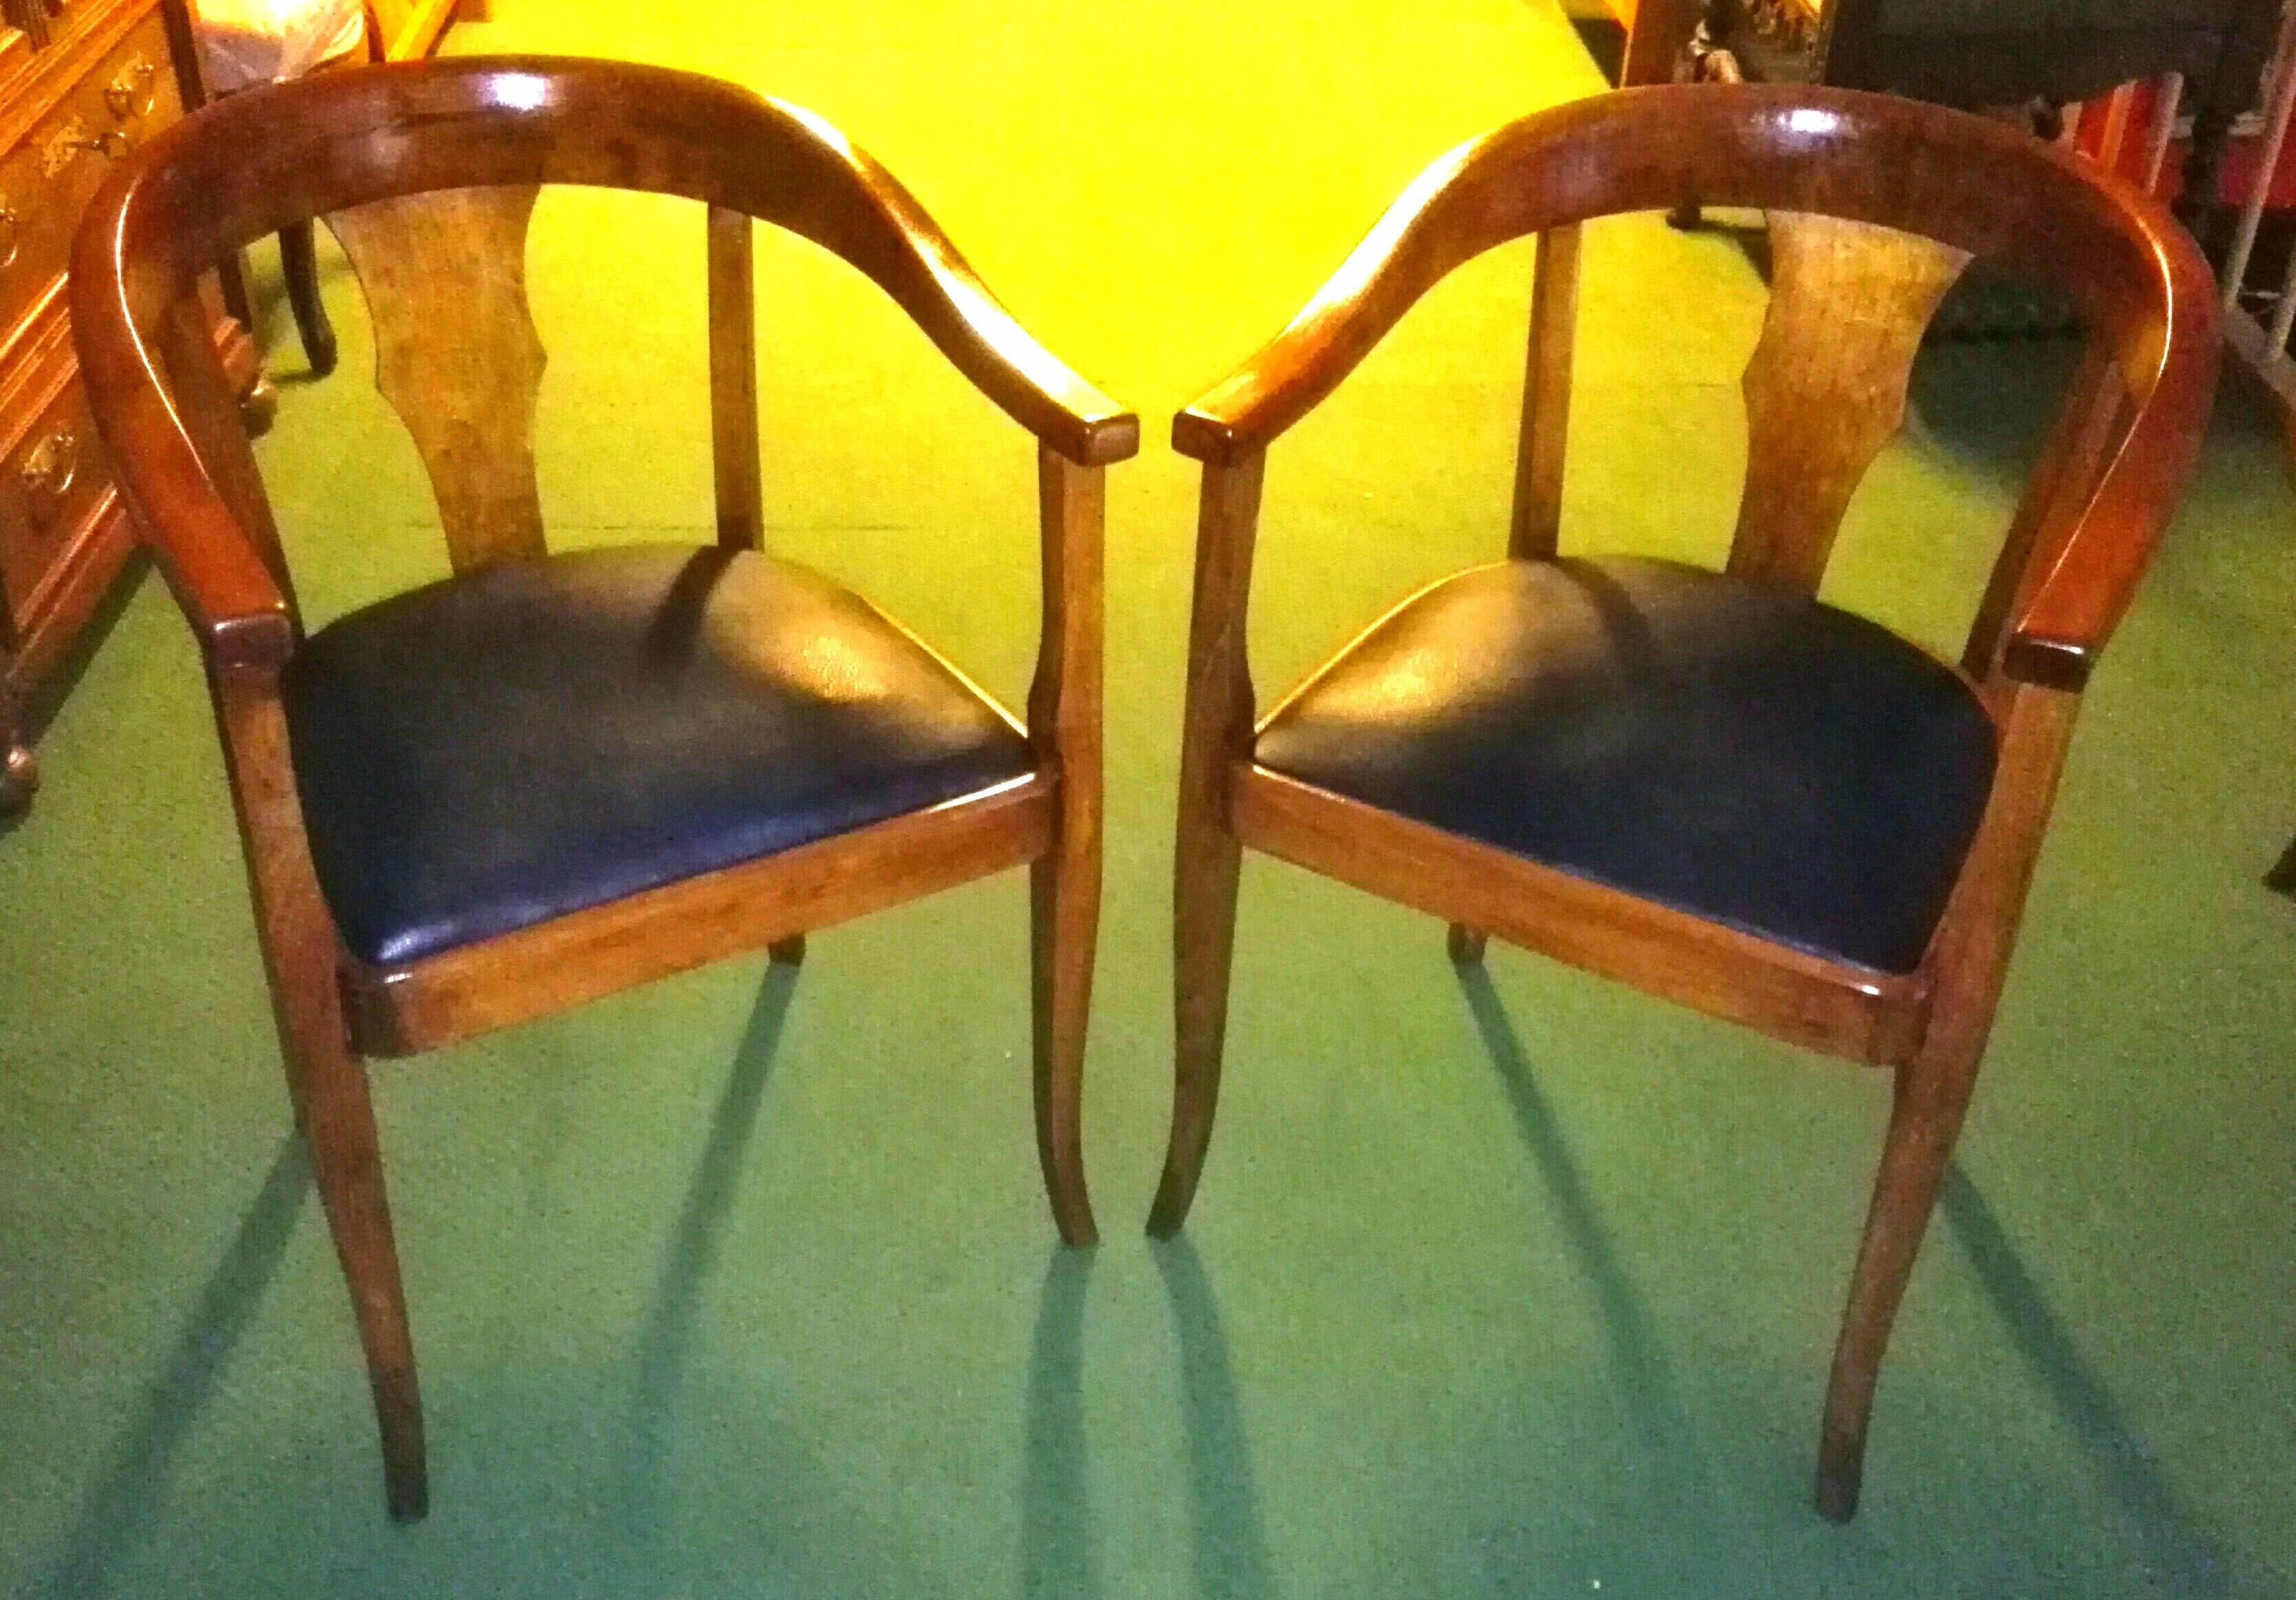 Polished Pair of Bauhaus Armchairs Germany 1925 Bentwood Massive Classic Modern Design For Sale